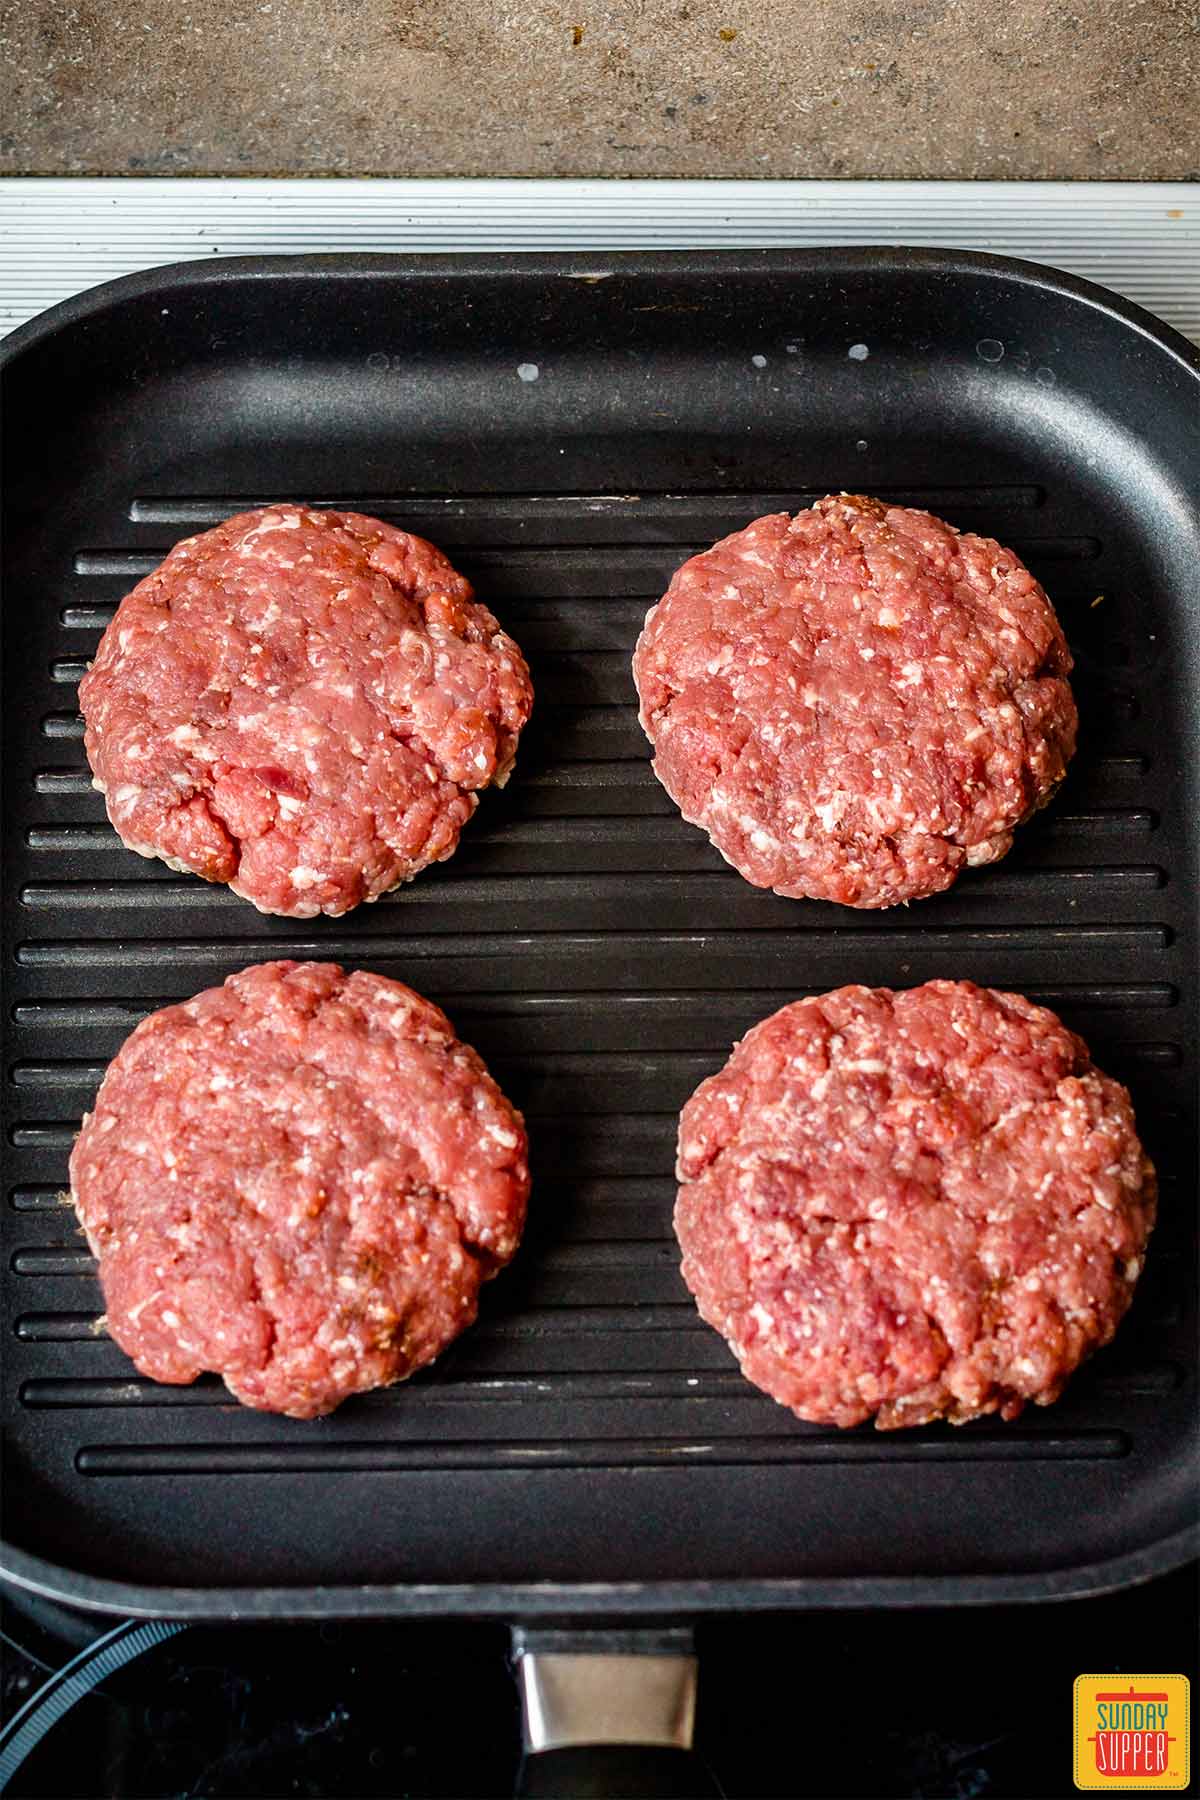 Uncooked burger patties on the grill